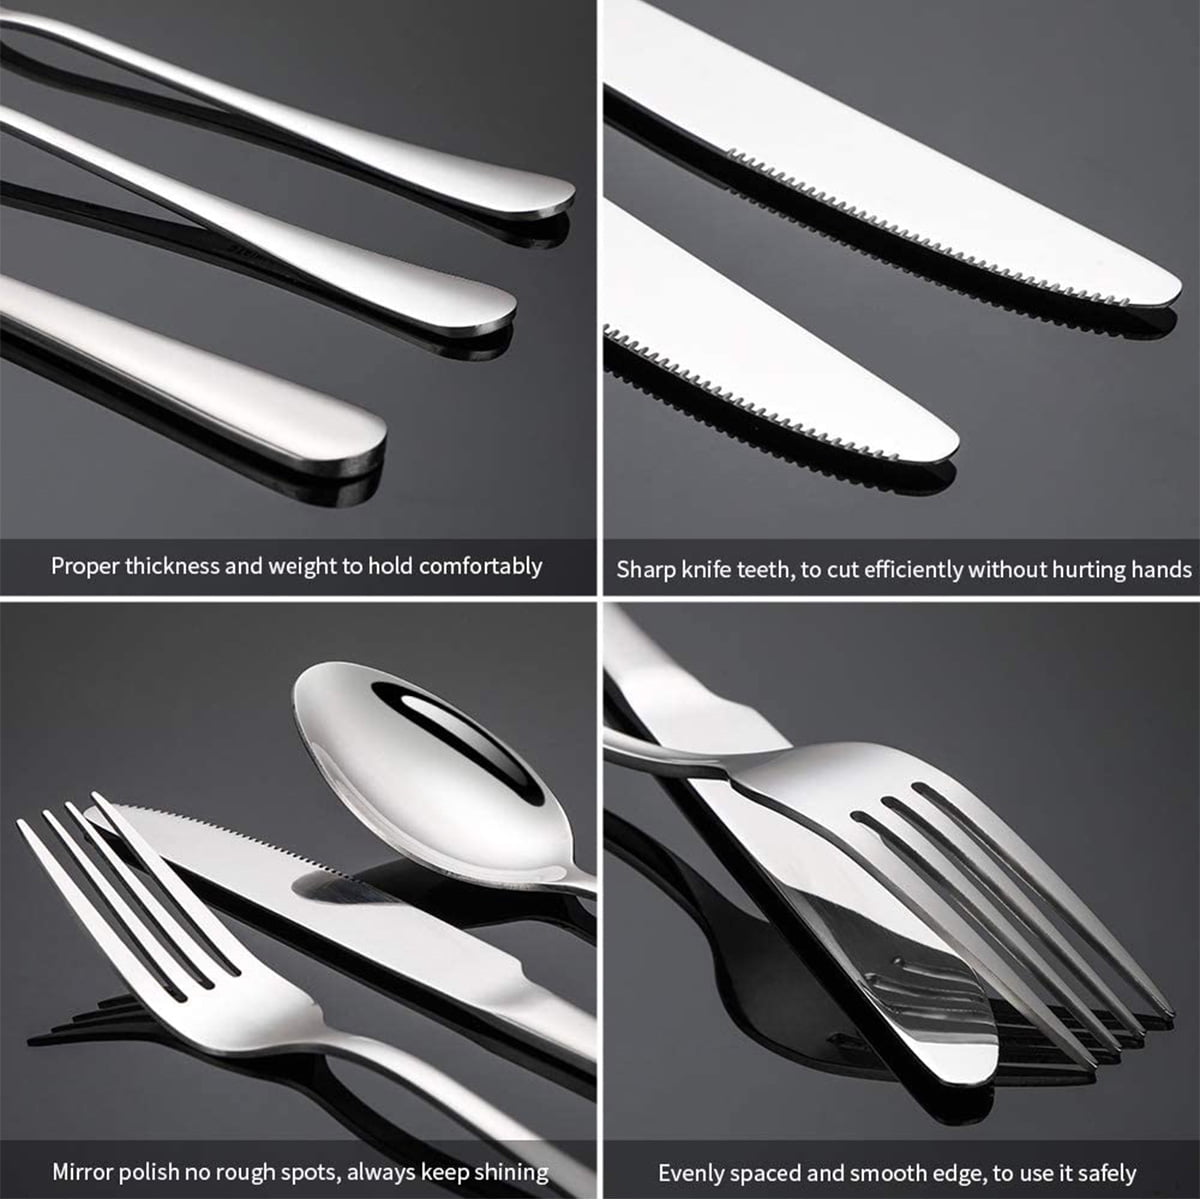 50 Piece Silverware Set Service for 10,Premium Stainless Steel Flatware Set,Mirror  Polished Cutlery Utensil Set,Durable Home Kitchen Eating Tableware -  Imported Products from USA - iBhejo